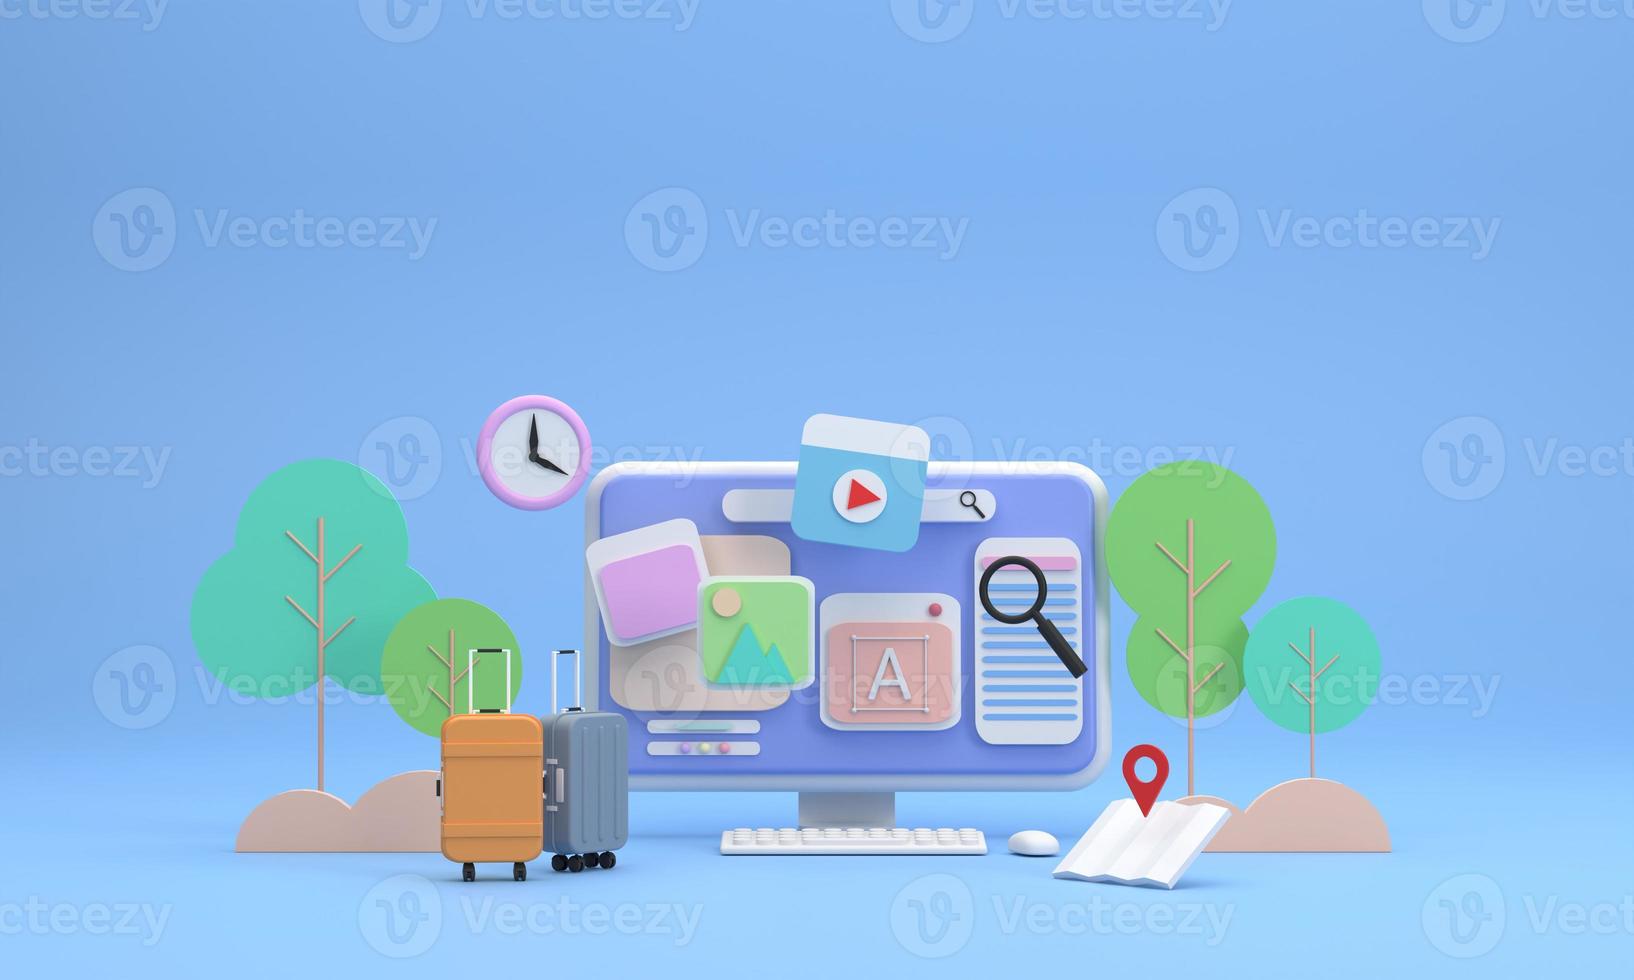 Computer screen showing icons about travel pictures and trees in the background. Travel bags and maps are included. Feels like searching for a place to visit then go out photo